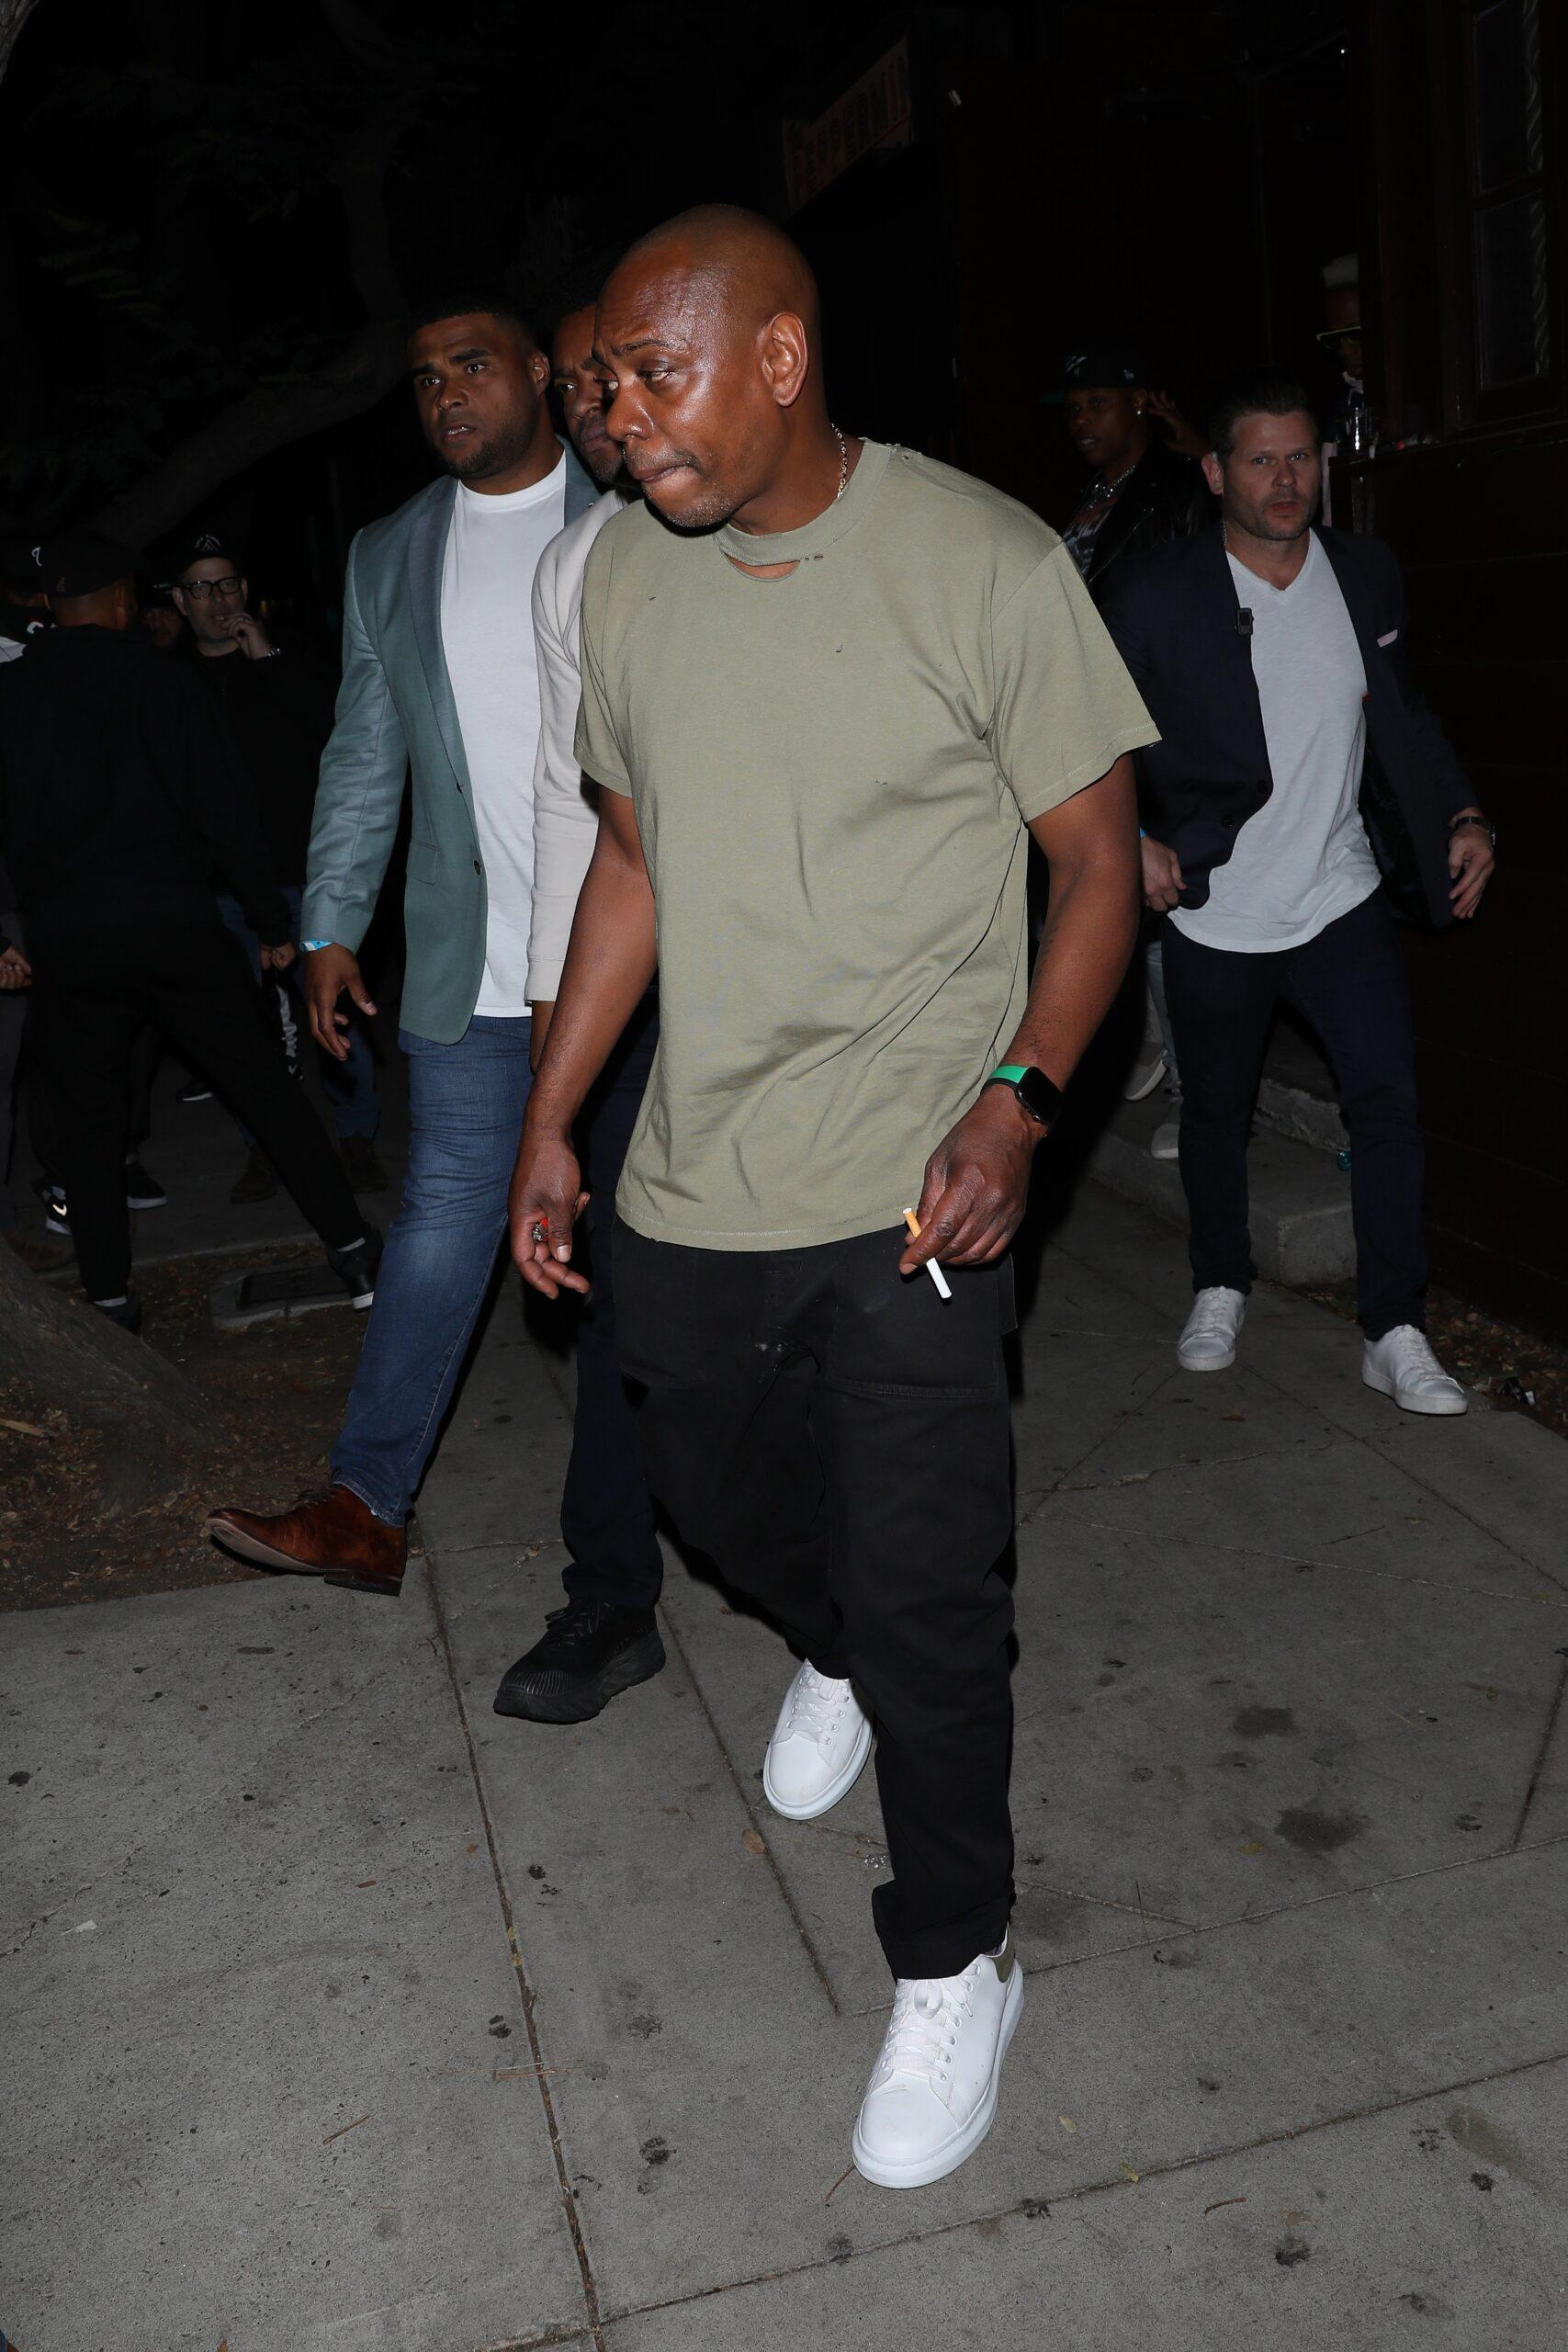 Comedian Dave Chappelle is seen exiting the Peppermint club after performing on stage